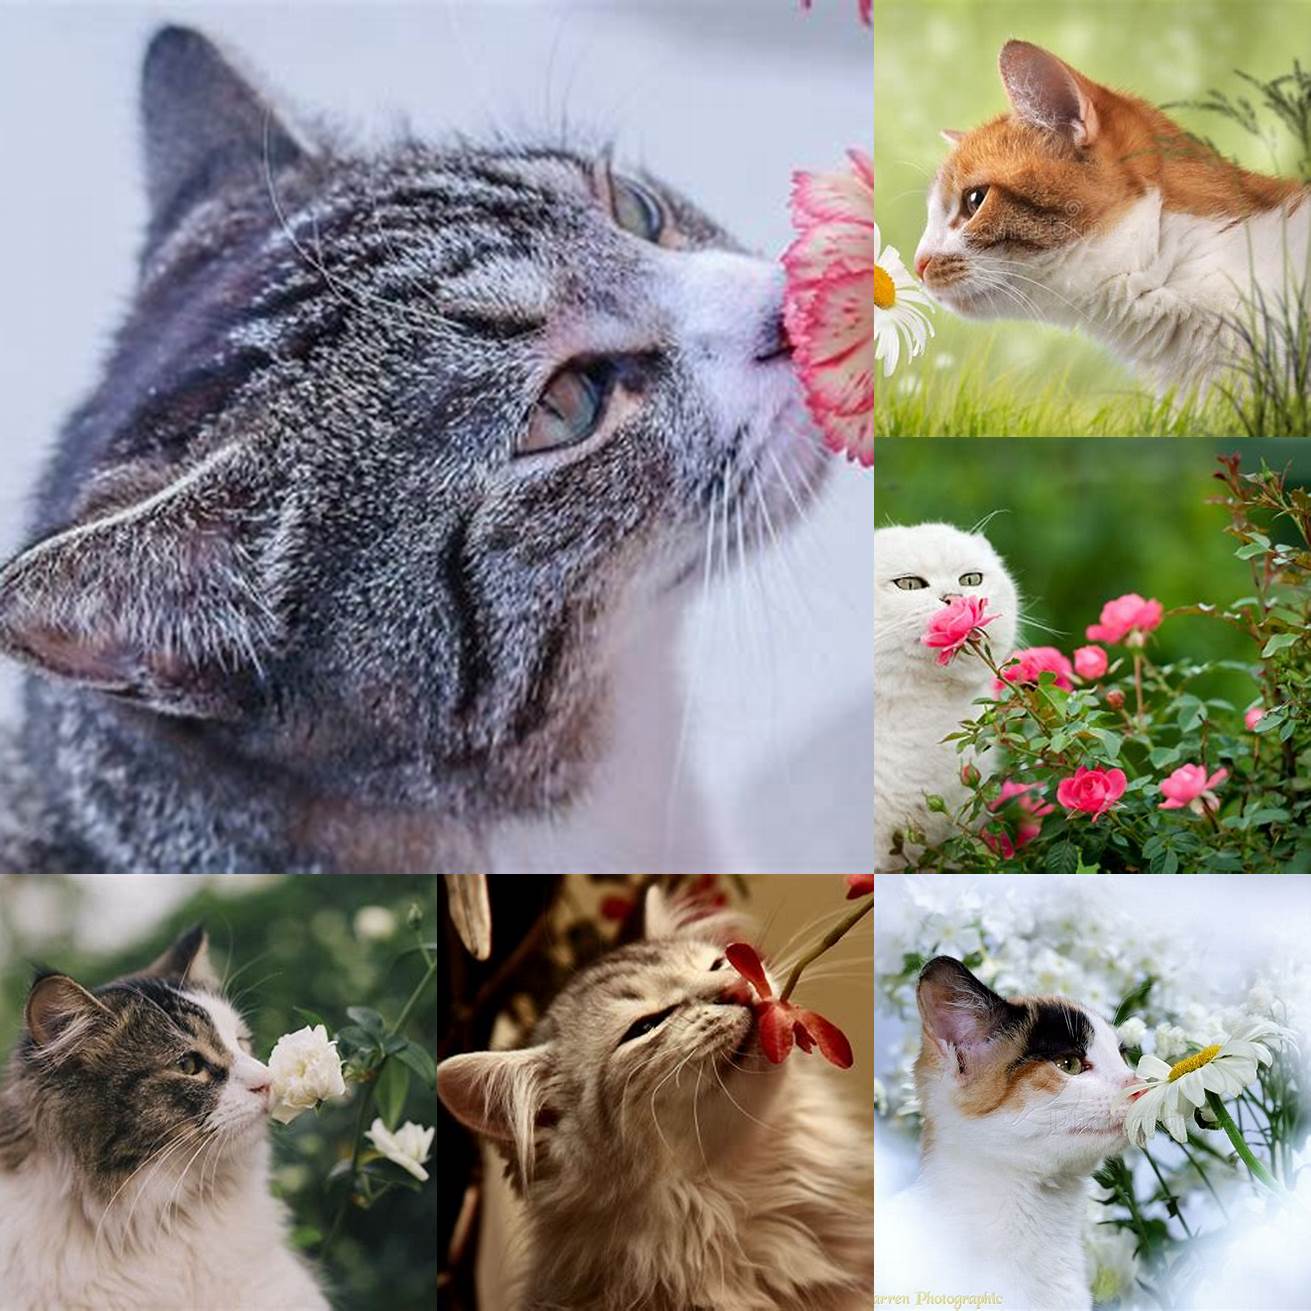 Cat sniffing a flower